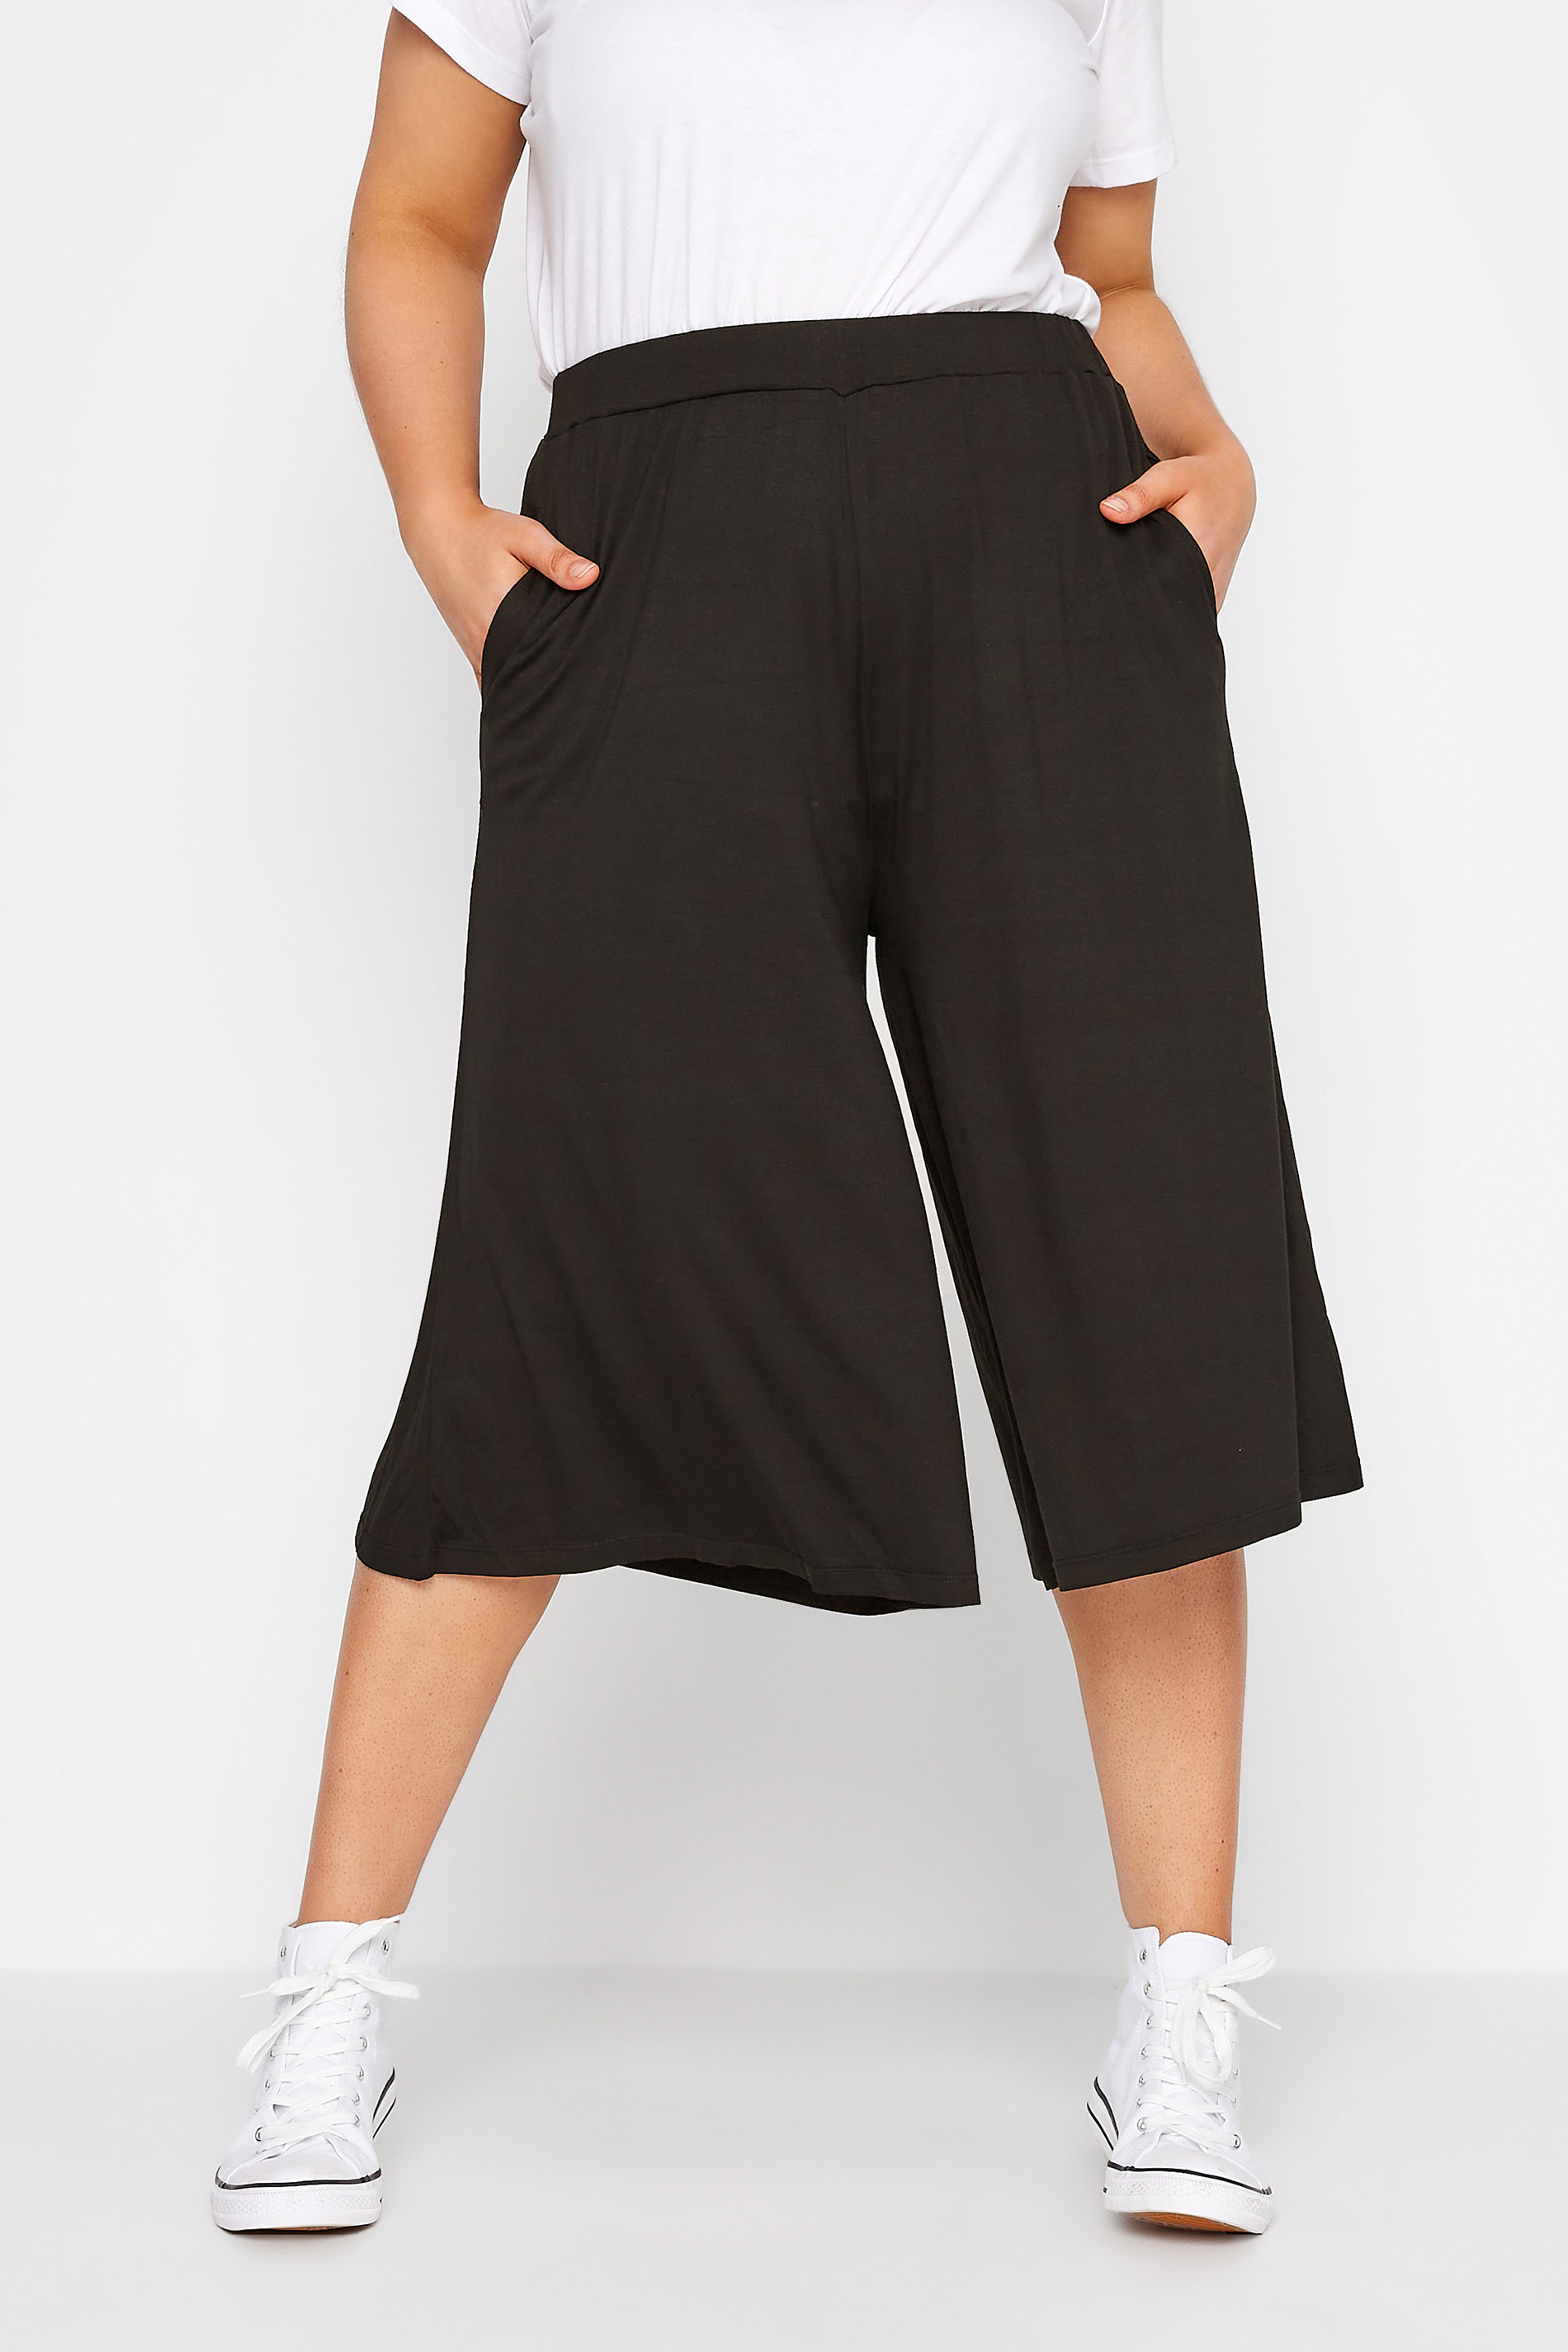 Black Jersey Culottes | Plus Sizes 16 to 36 | Yours Clothing  1